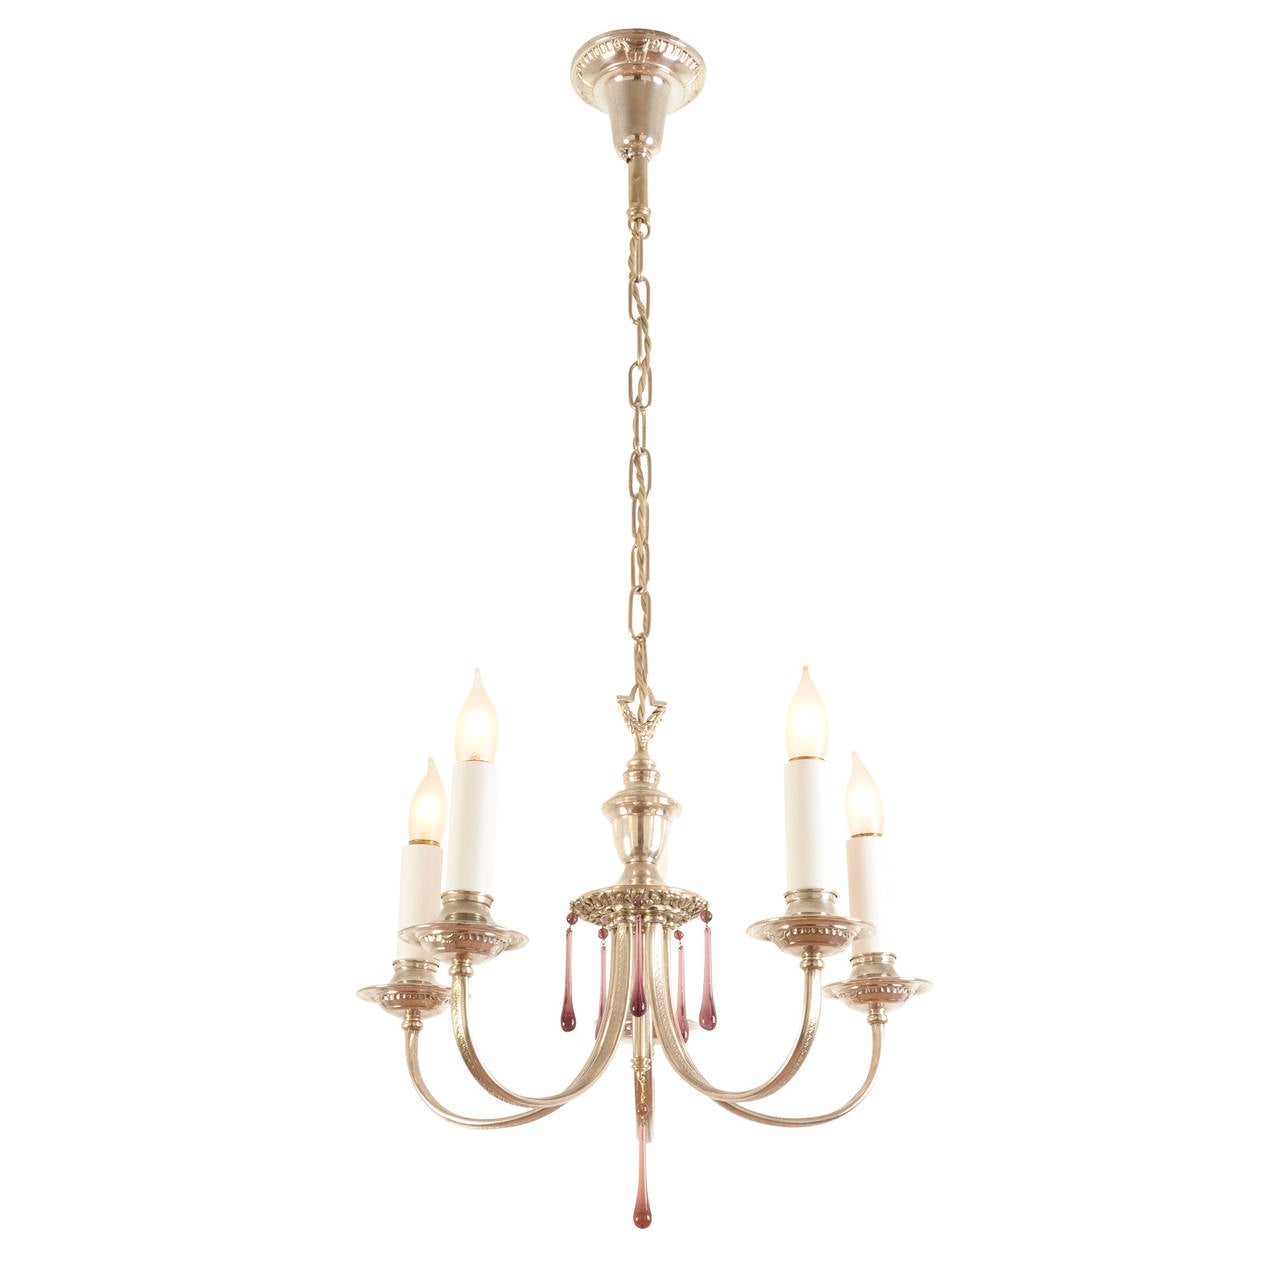 Colonial Revival Chandeliers were so plentiful and so many variations sprung from that style, that when a unique iteration comes into our collection, we have to share it. The details of this piece really make it stand out: the silver-plated finish,